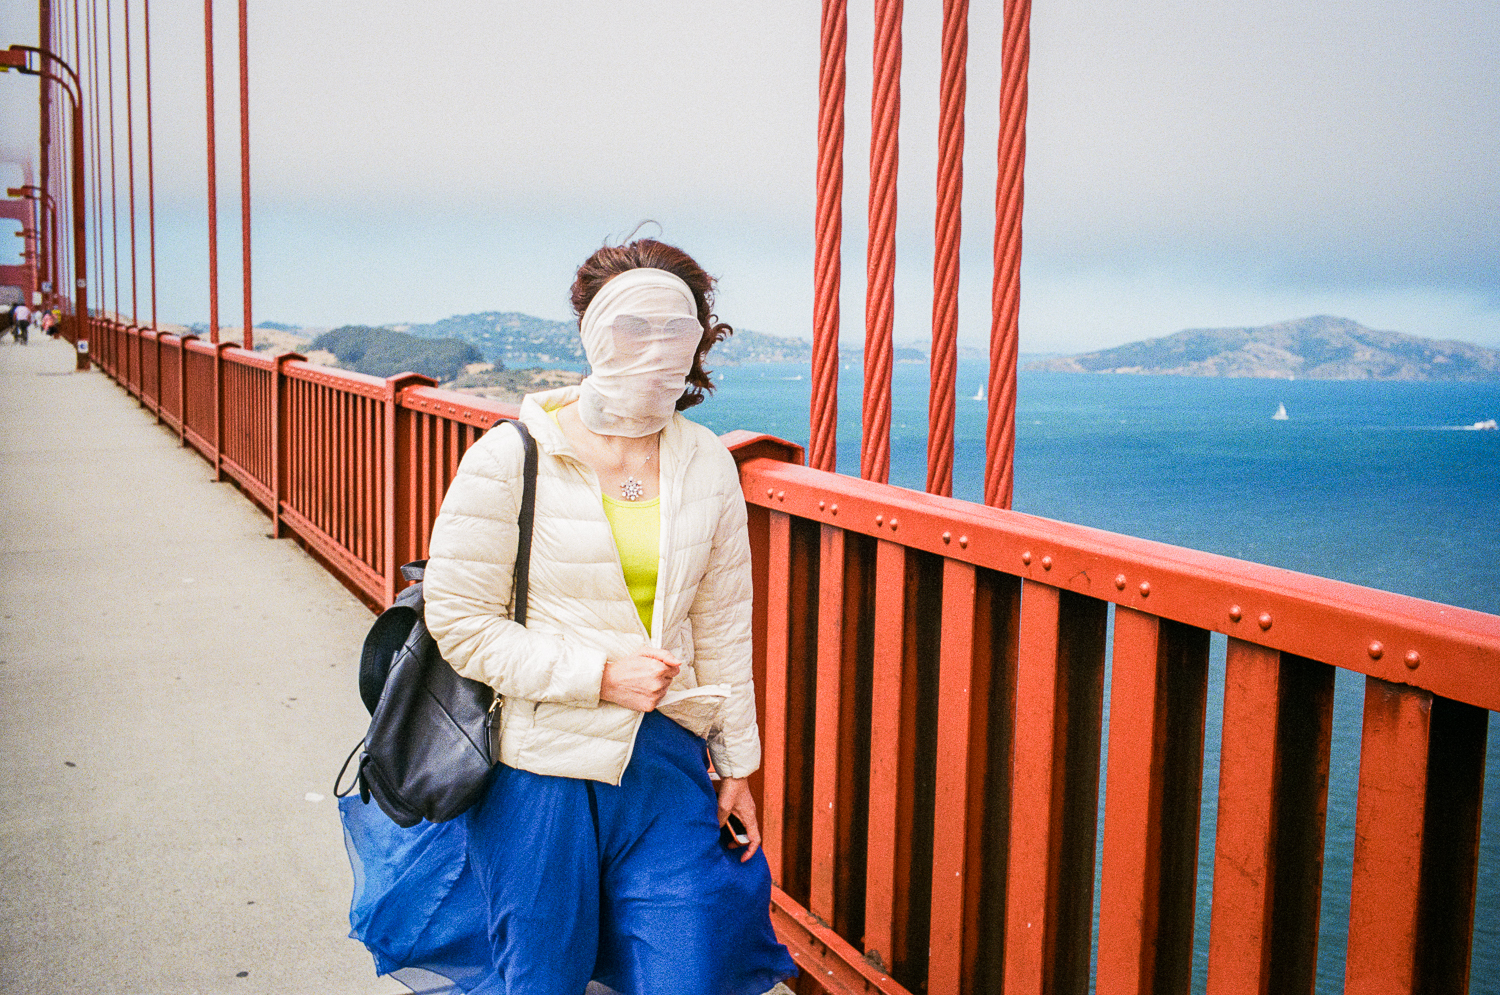 A woman walks over the bridge with a covering over her face in September 2019.